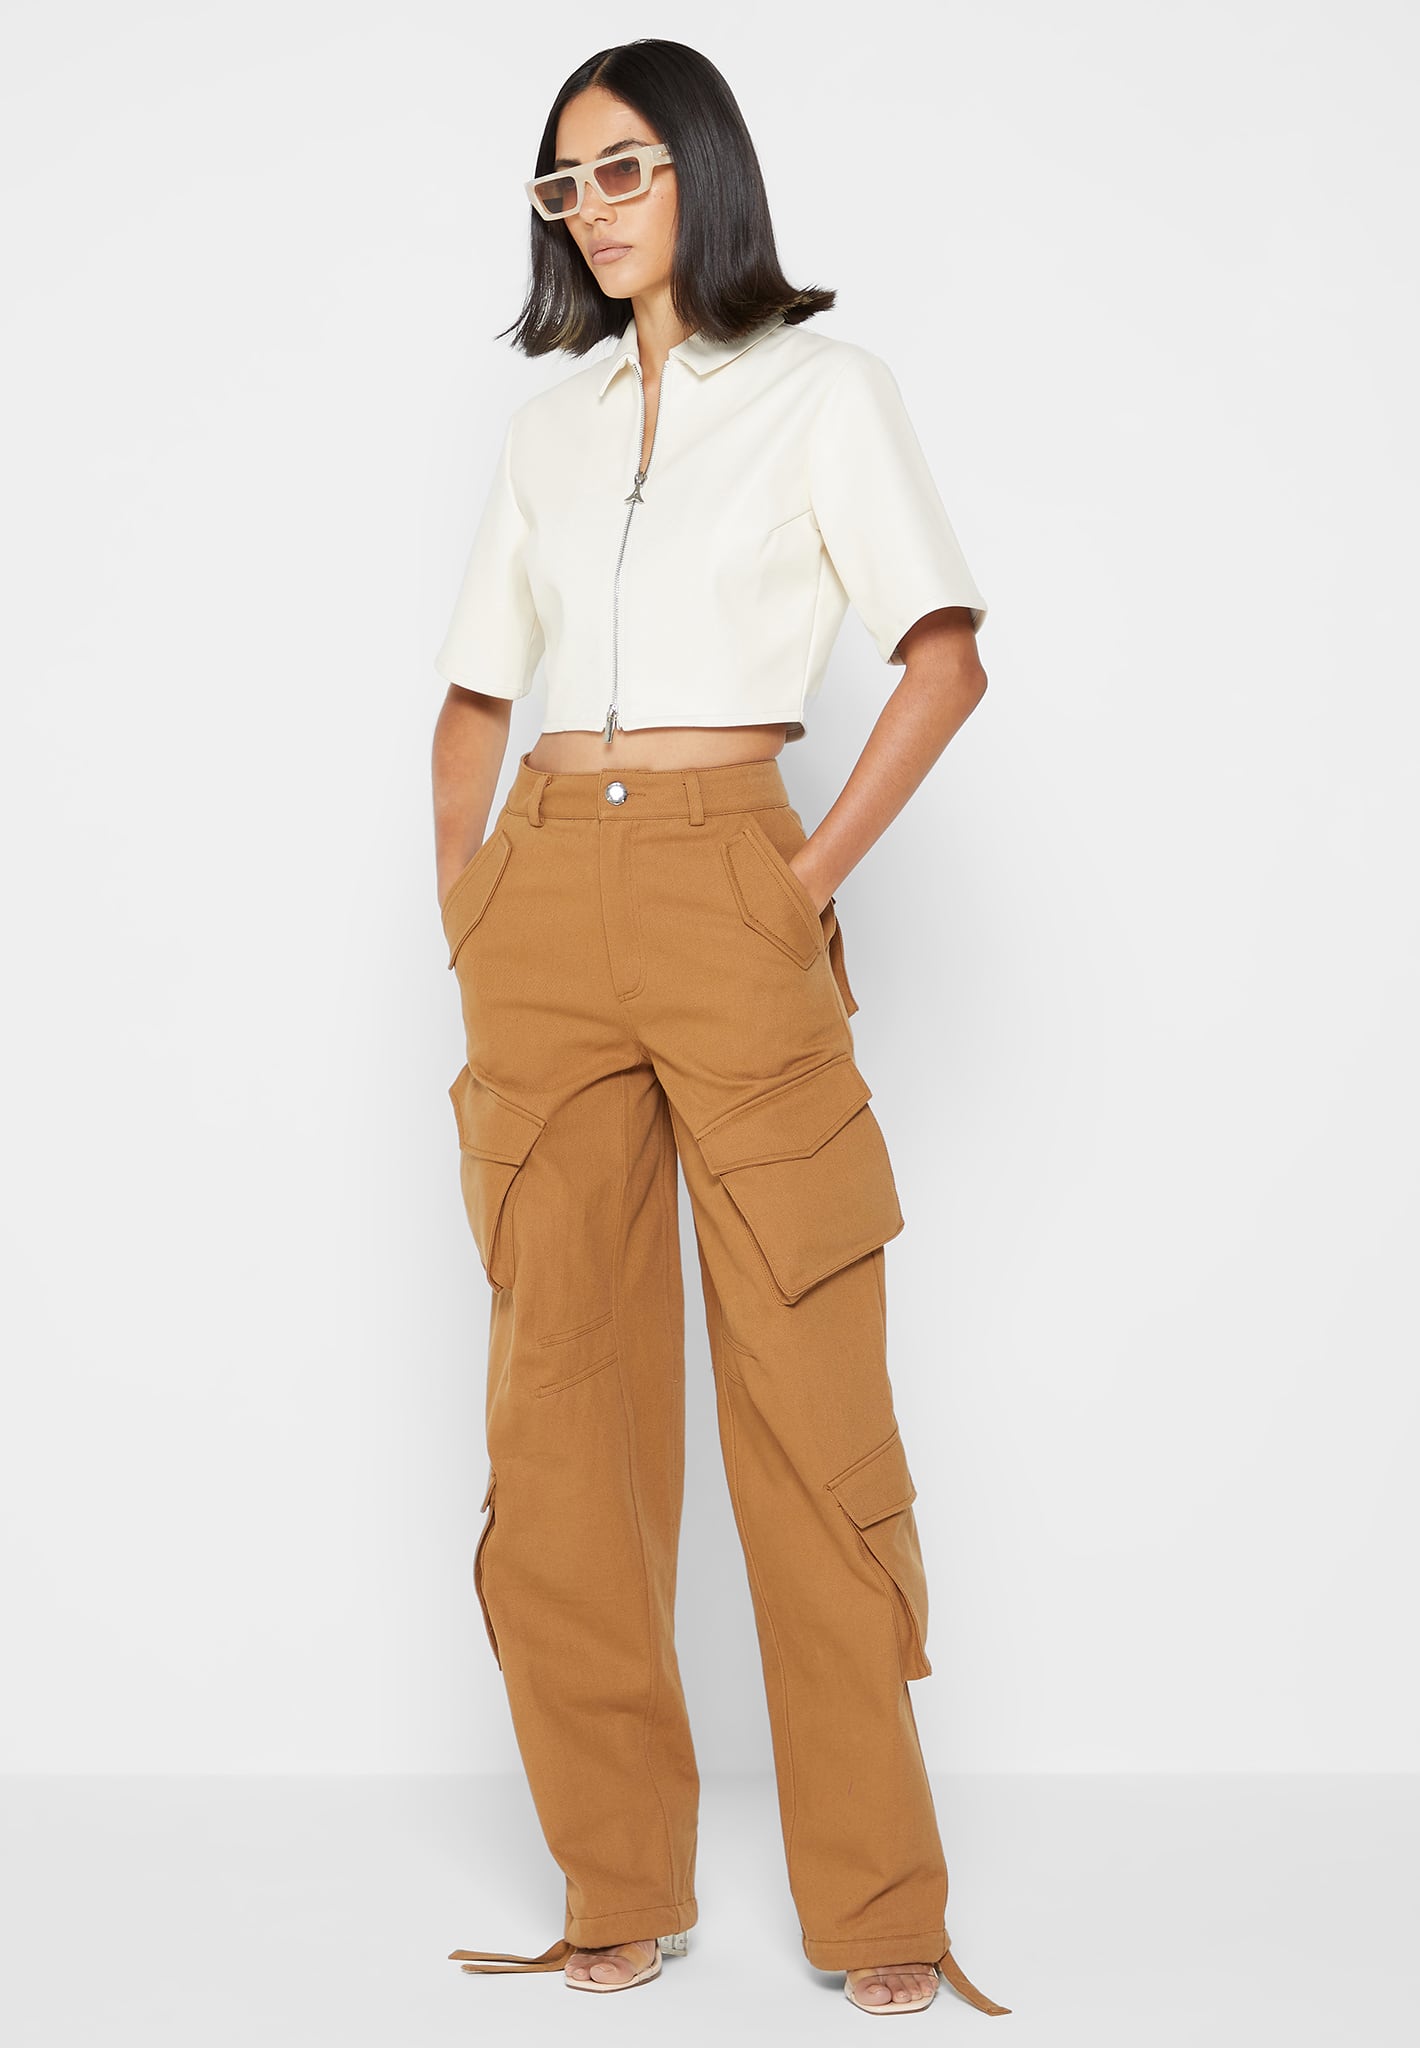 BVnarty Cargo Pants for Women Solid Color Street Style Overalls